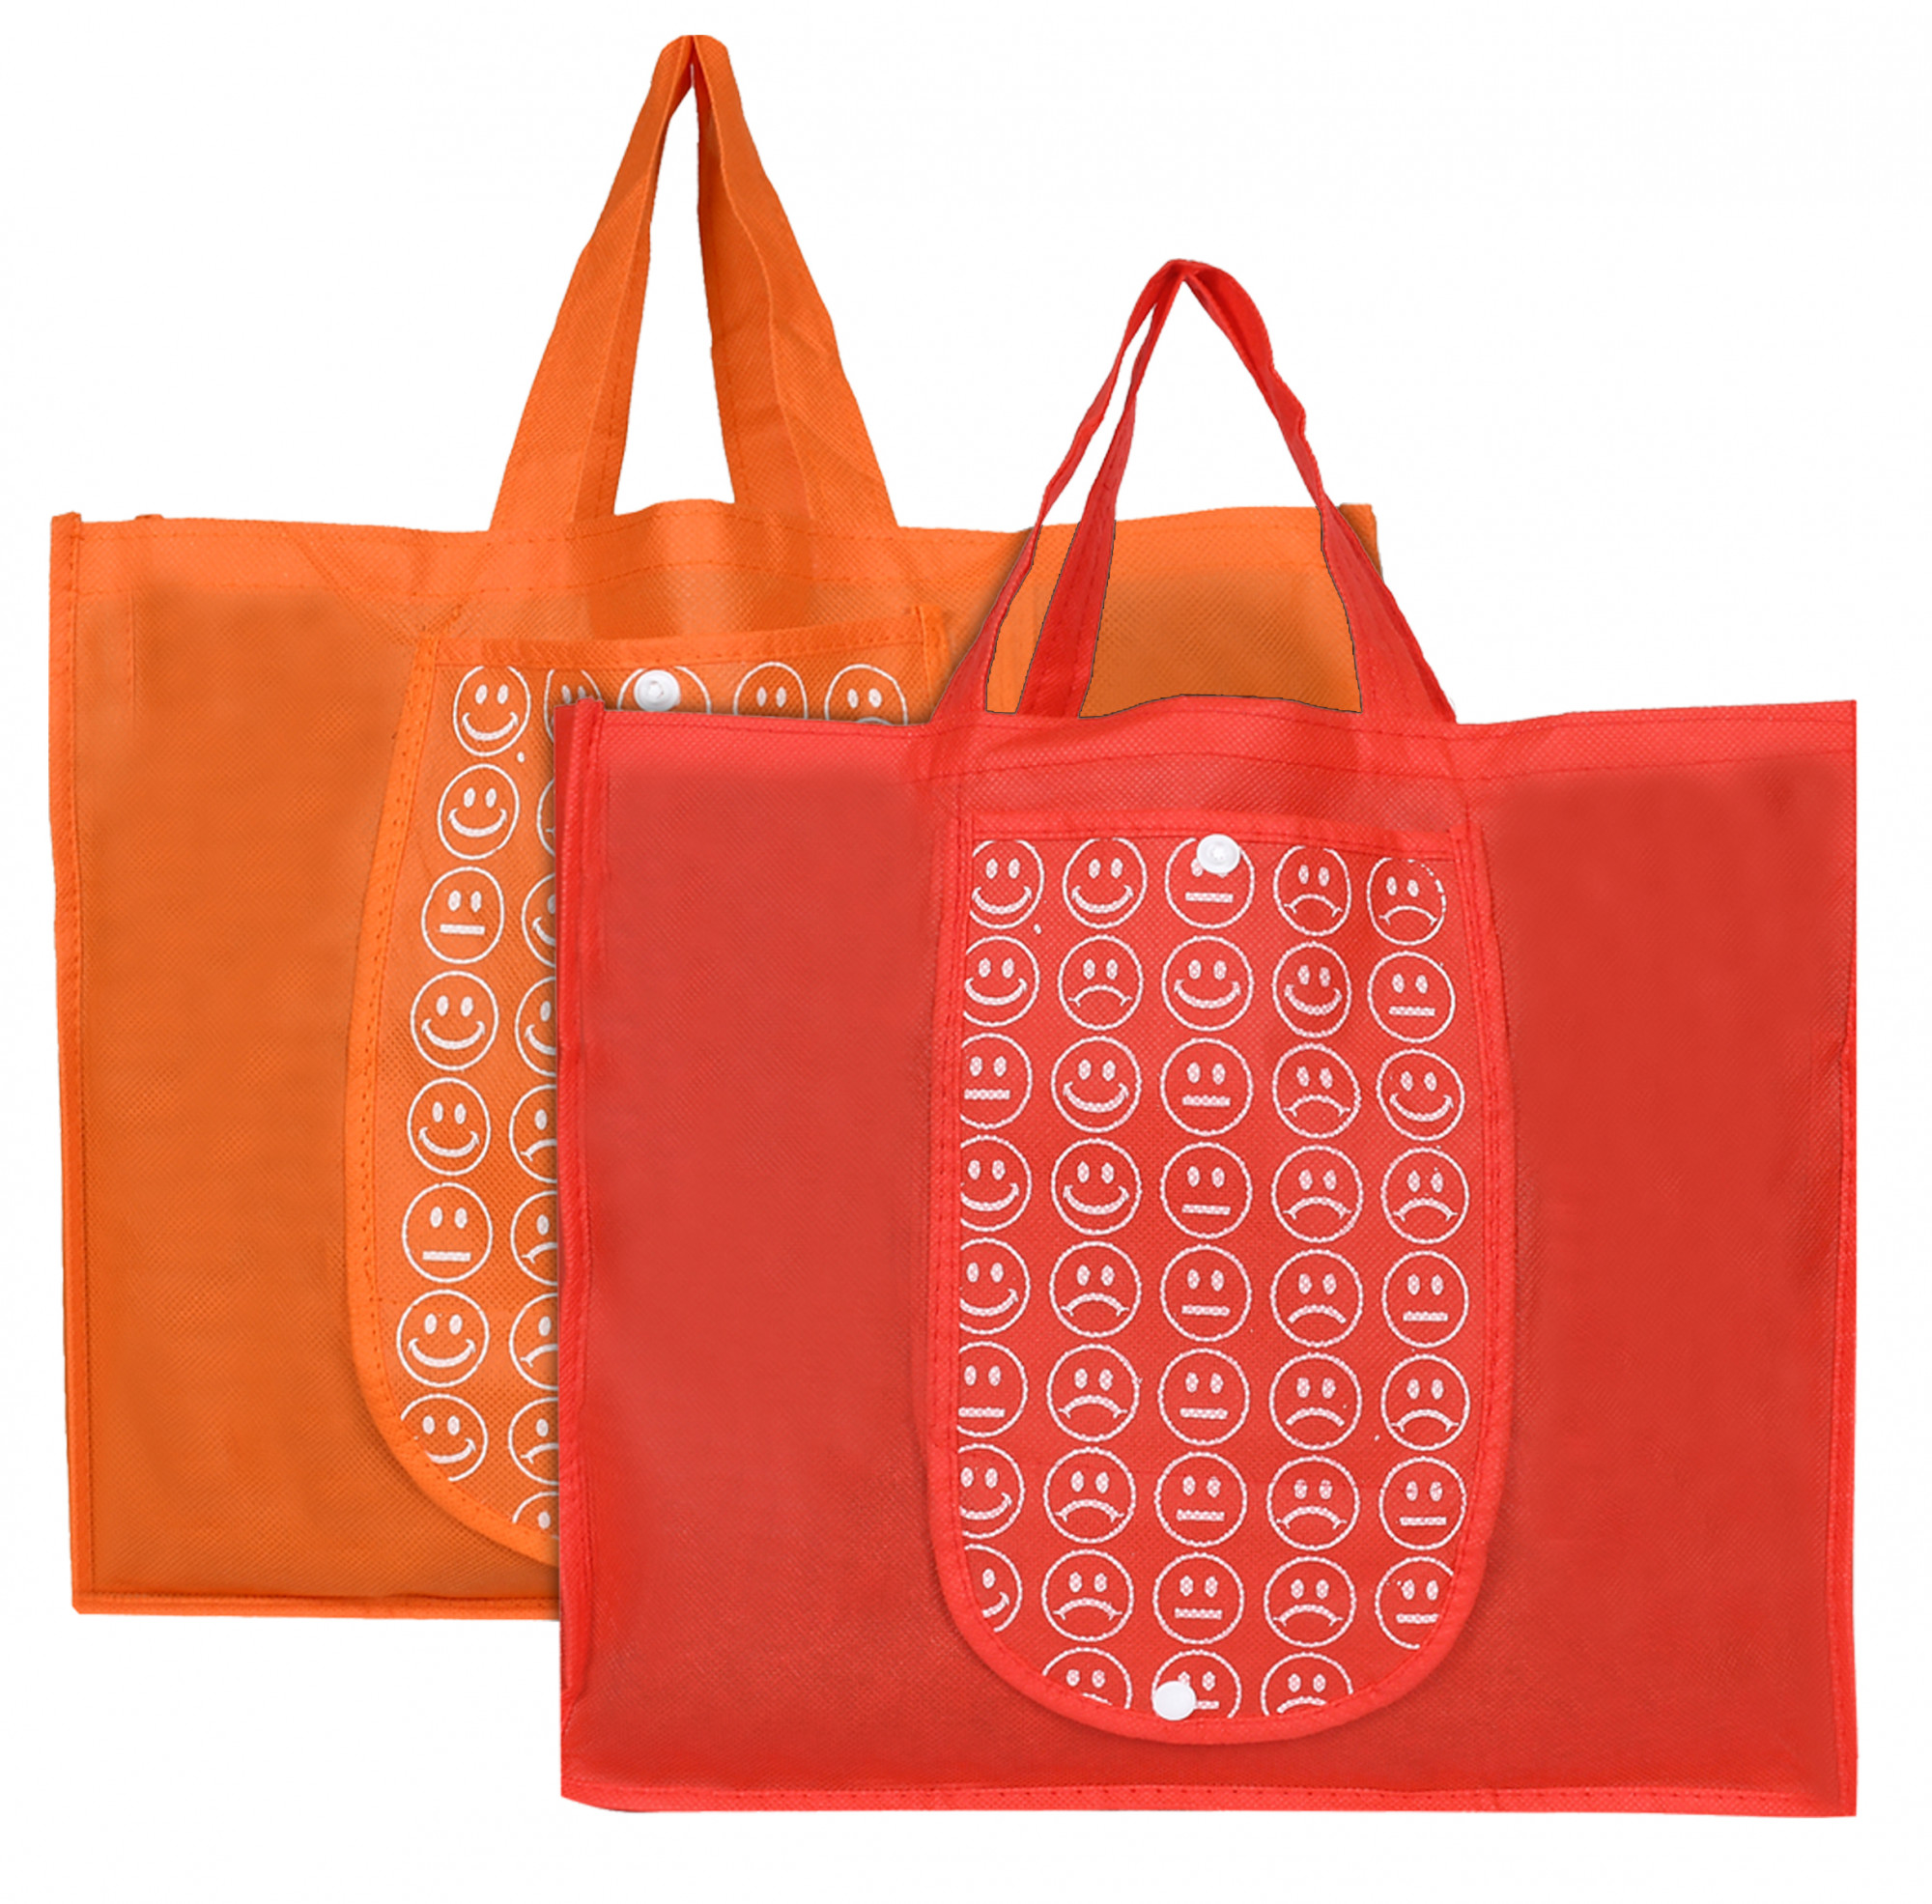 Kuber Industries Shopping Grocery Bags Foldable, Washable Grocery Tote Bag with One Small Pocket, Eco-Friendly Purse Bag Fits in Pocket Waterproof & Lightweight (Orange & Red)